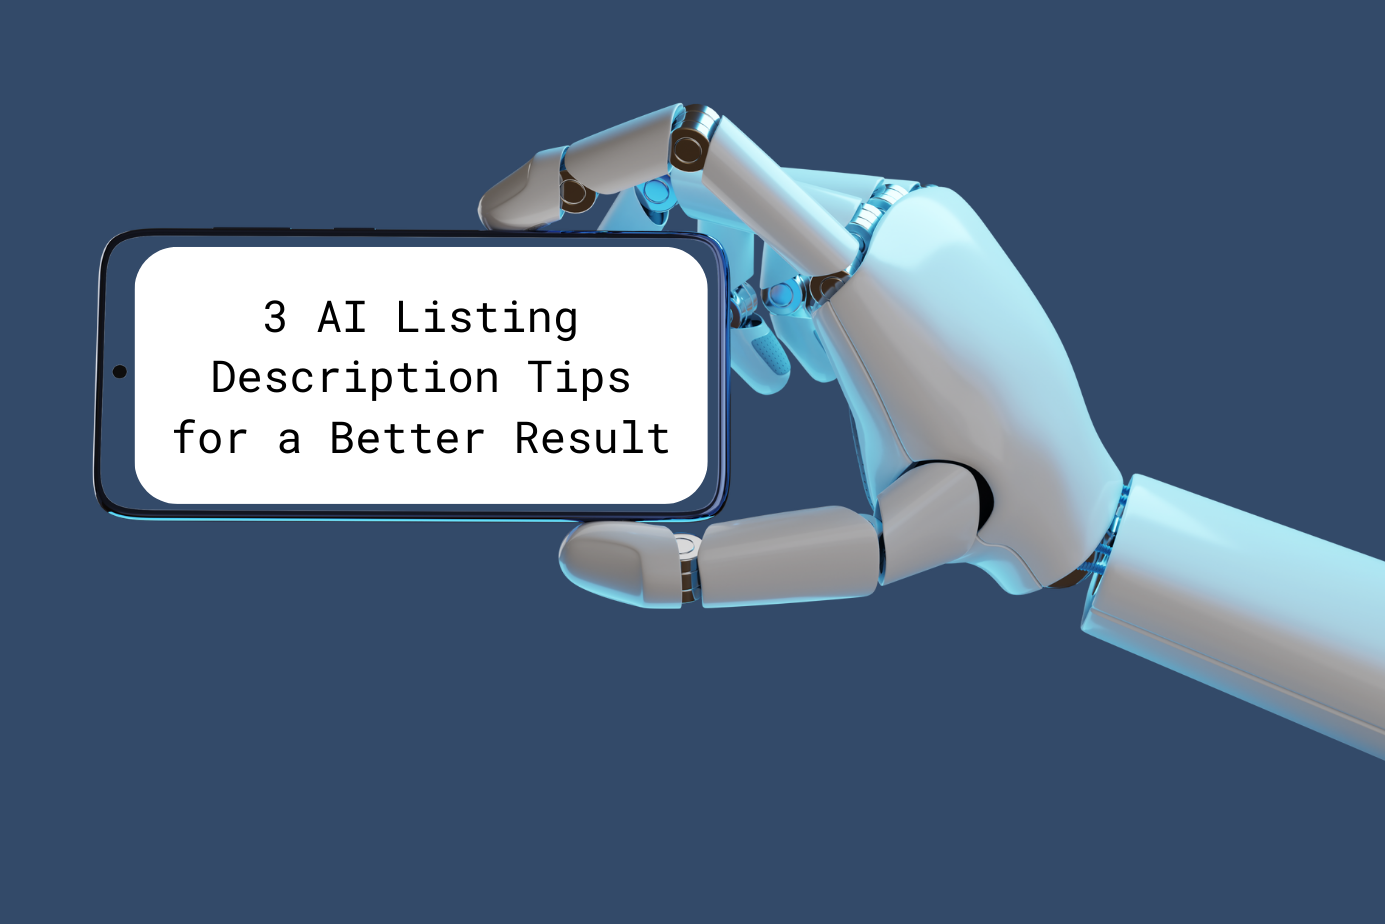 image of a robot hand holding a sign that says 3 AI Listing Description Tips for a Better Result